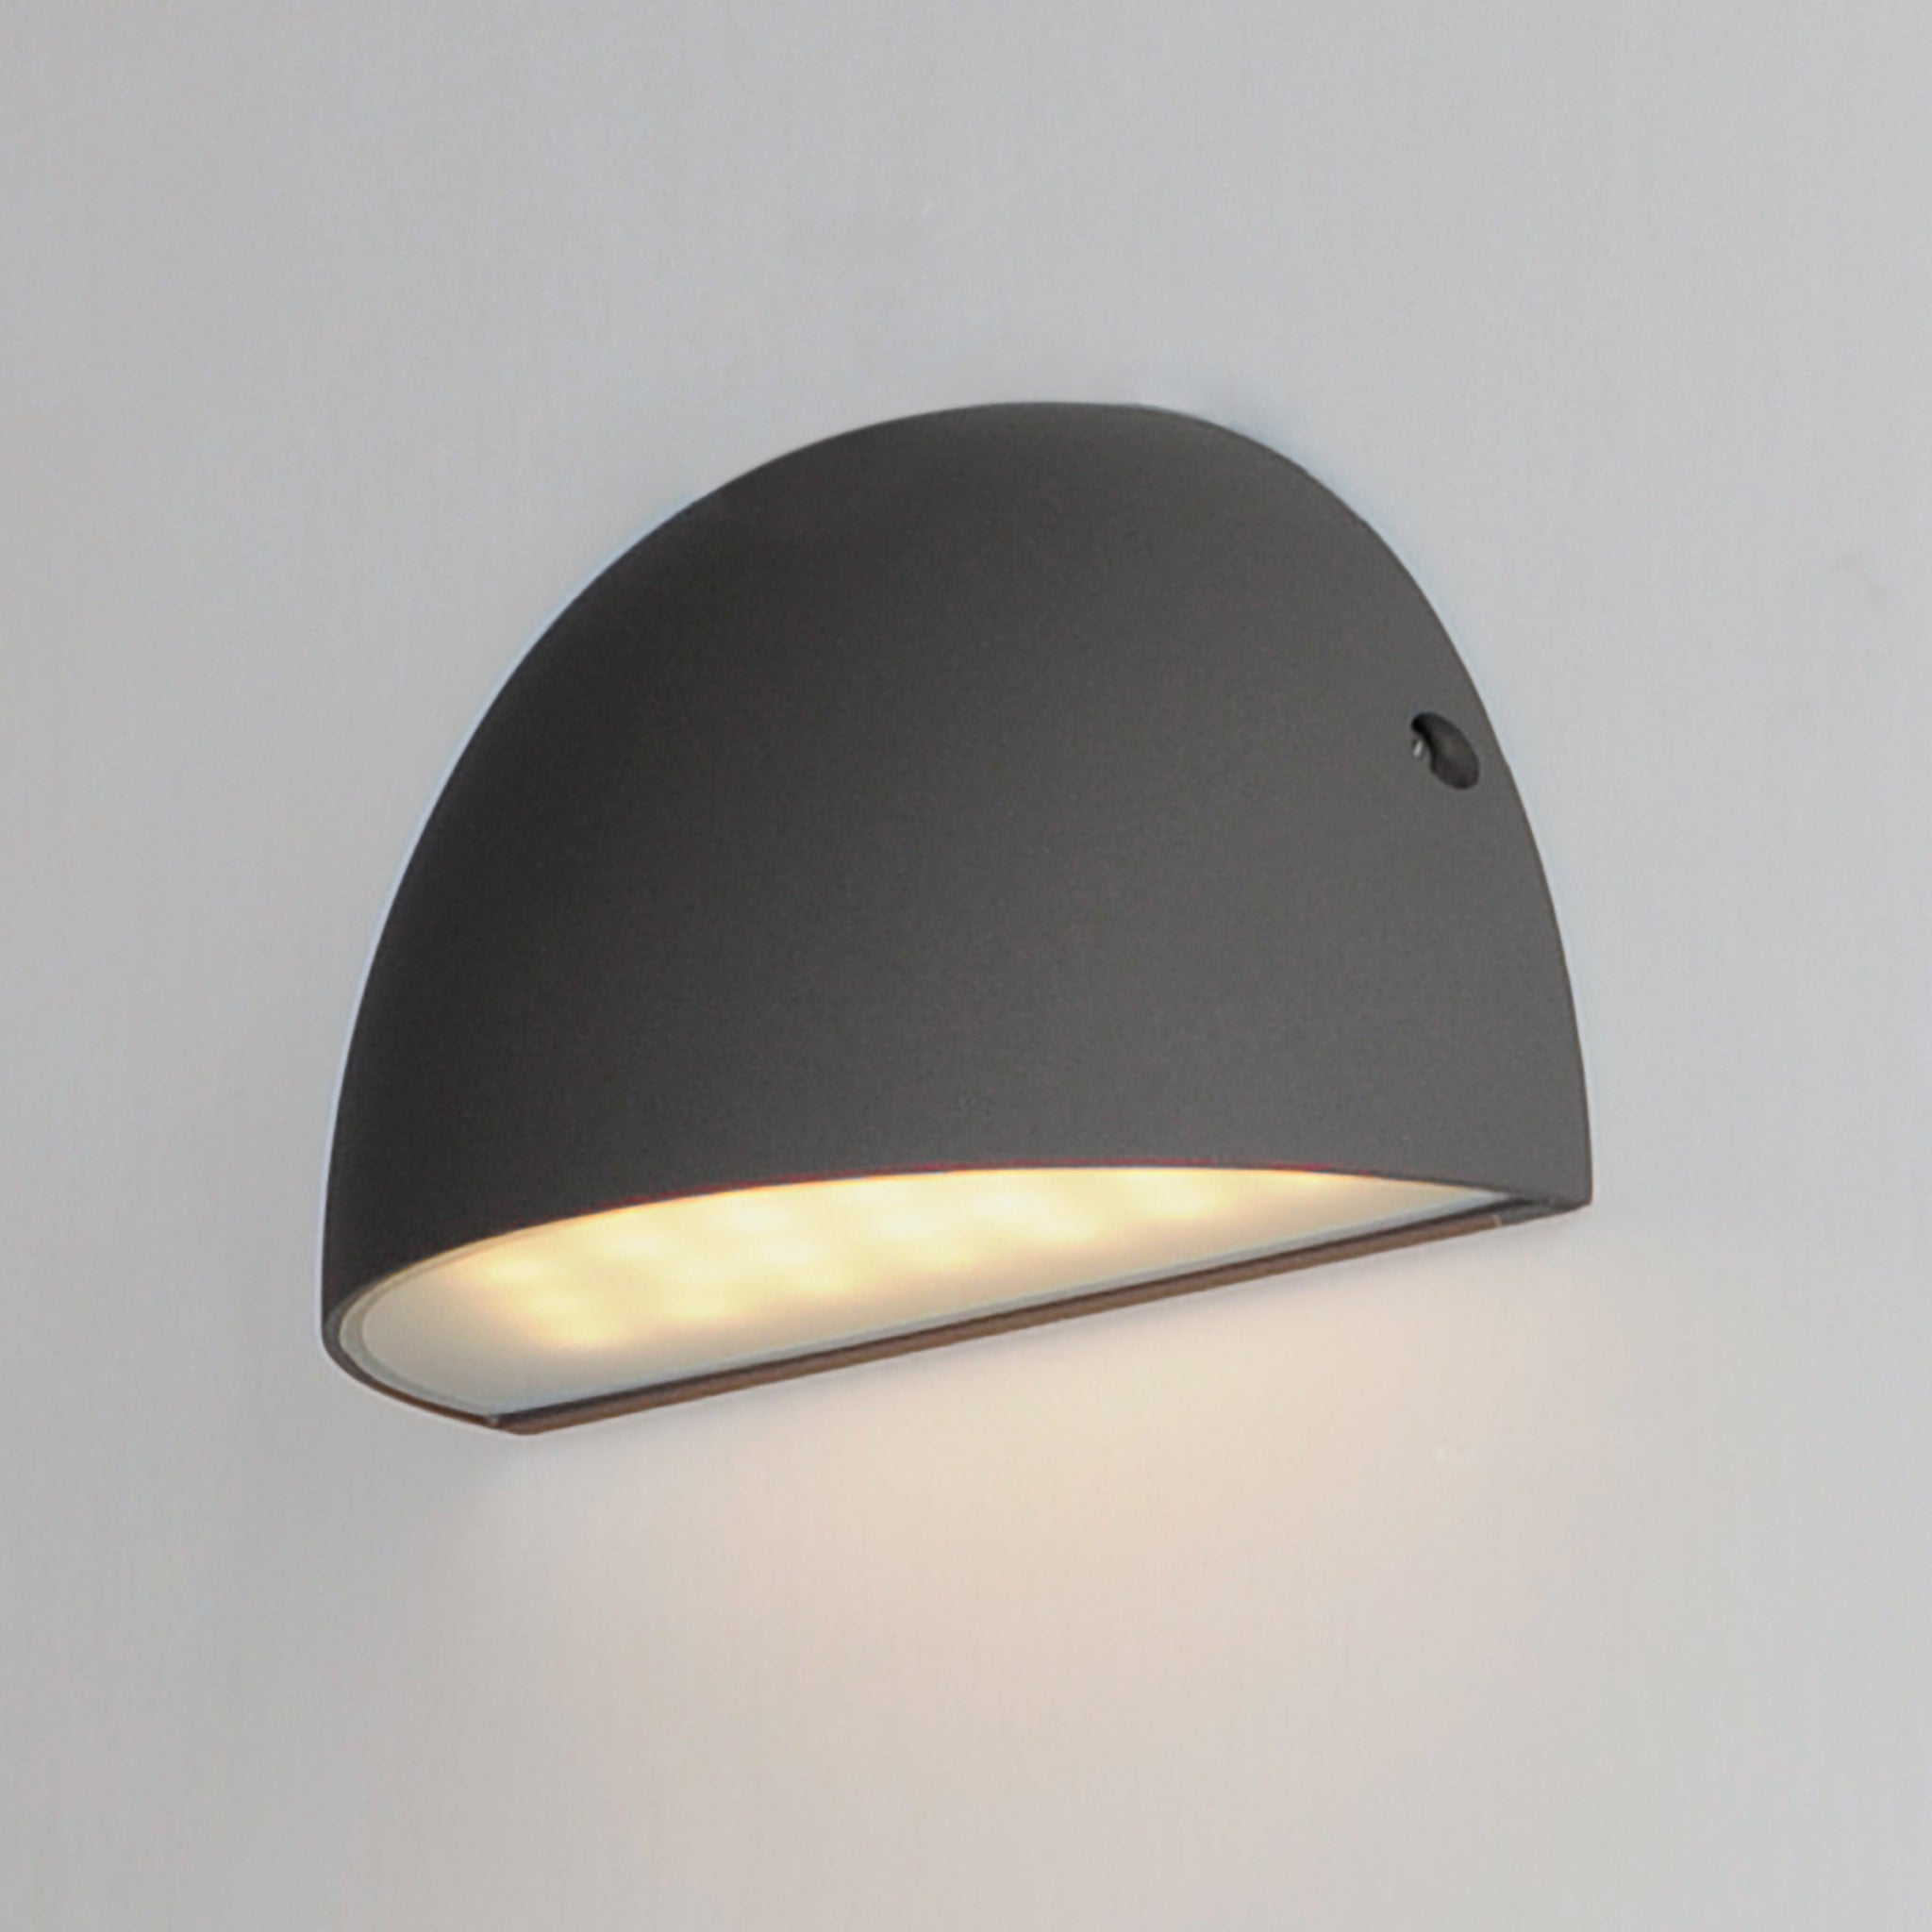 Pathfinder LED Outdoor Wall Light